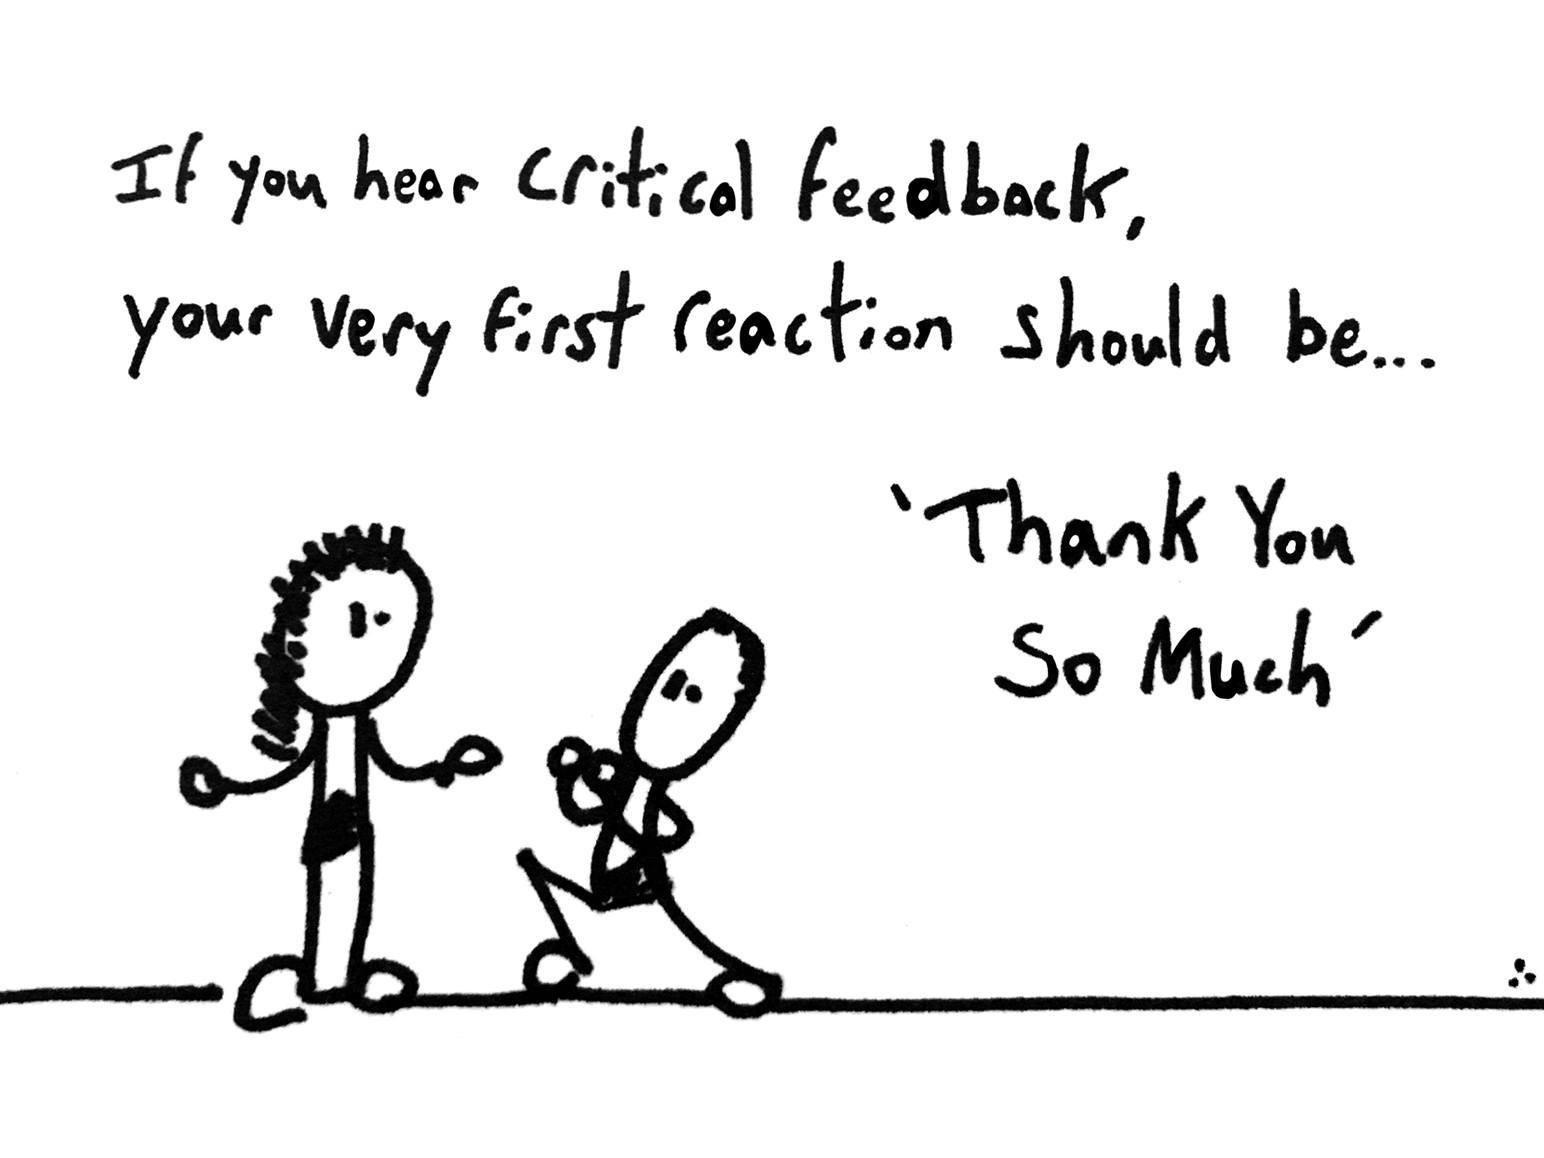 If you are a leader and you hear any type of critical feedback, your very first reaction should be… thank you so much.